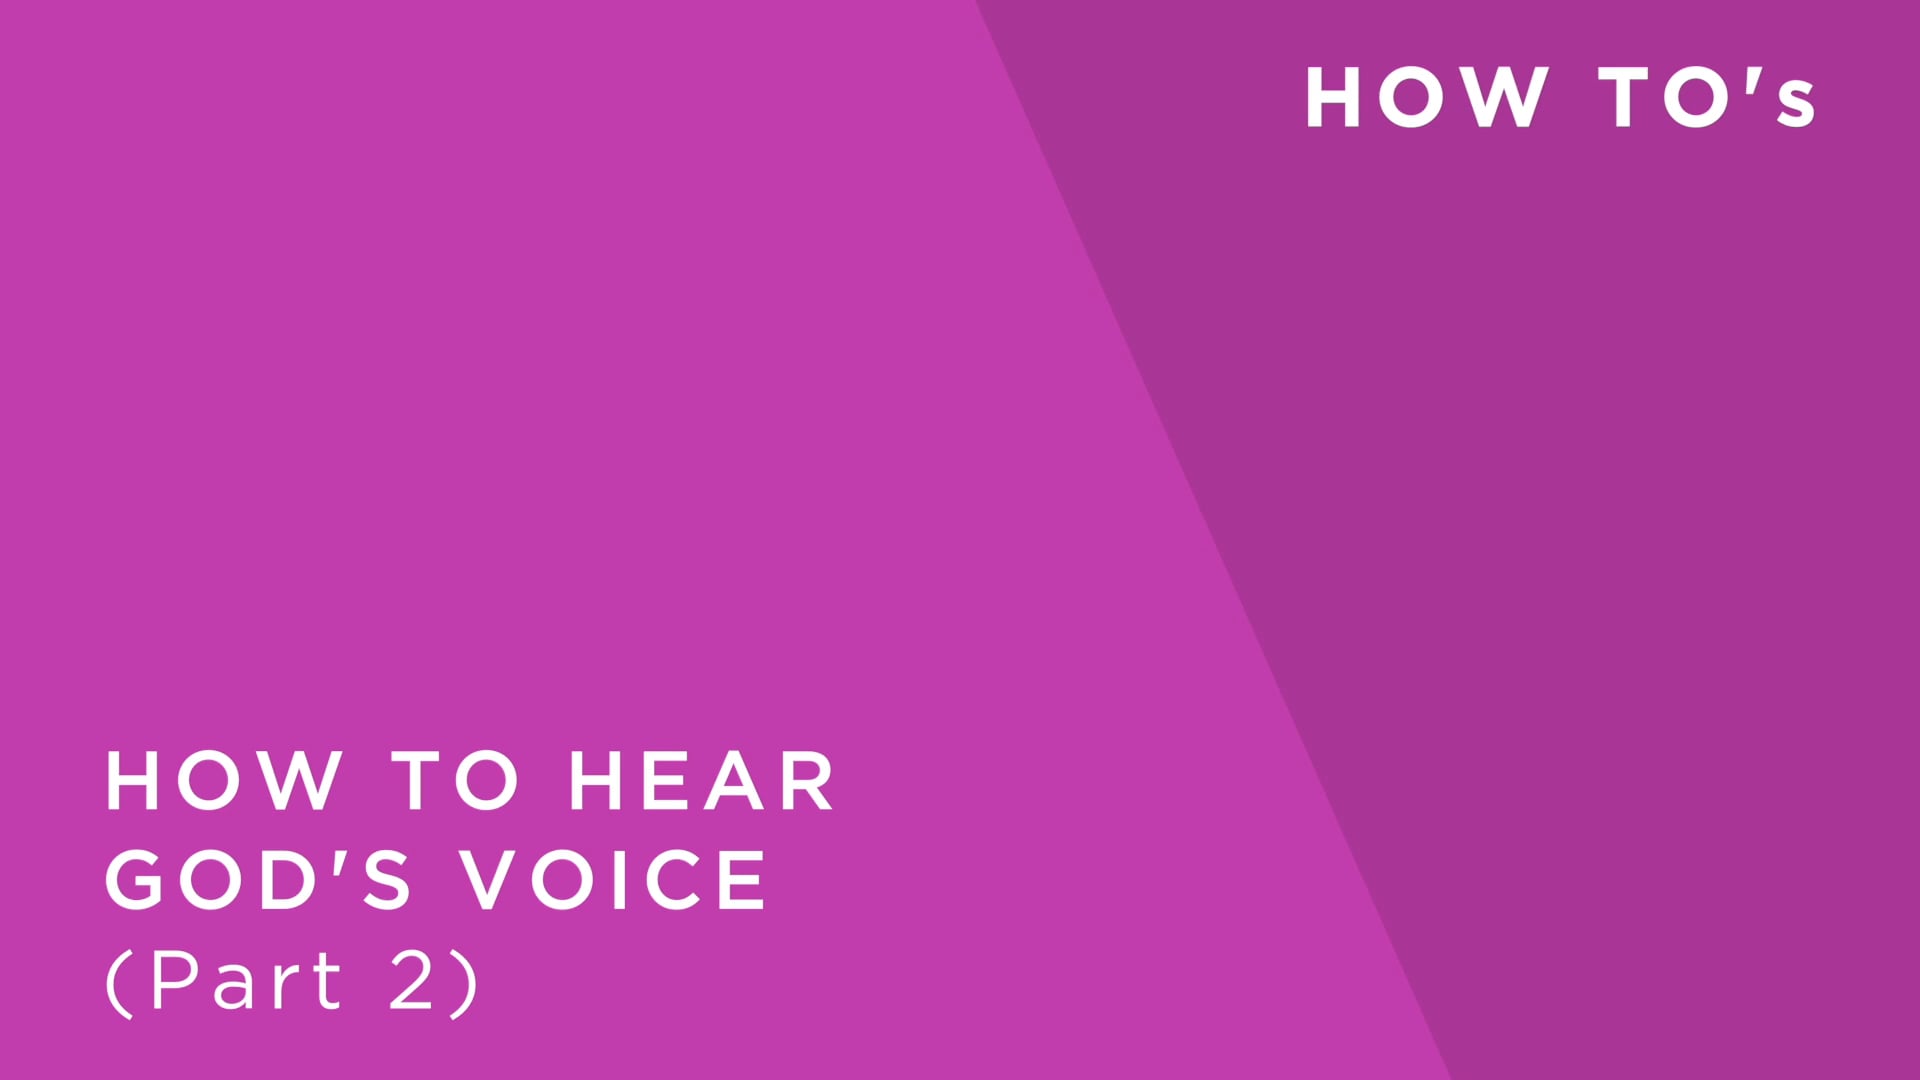 How to Hear God's Voice - Part 2